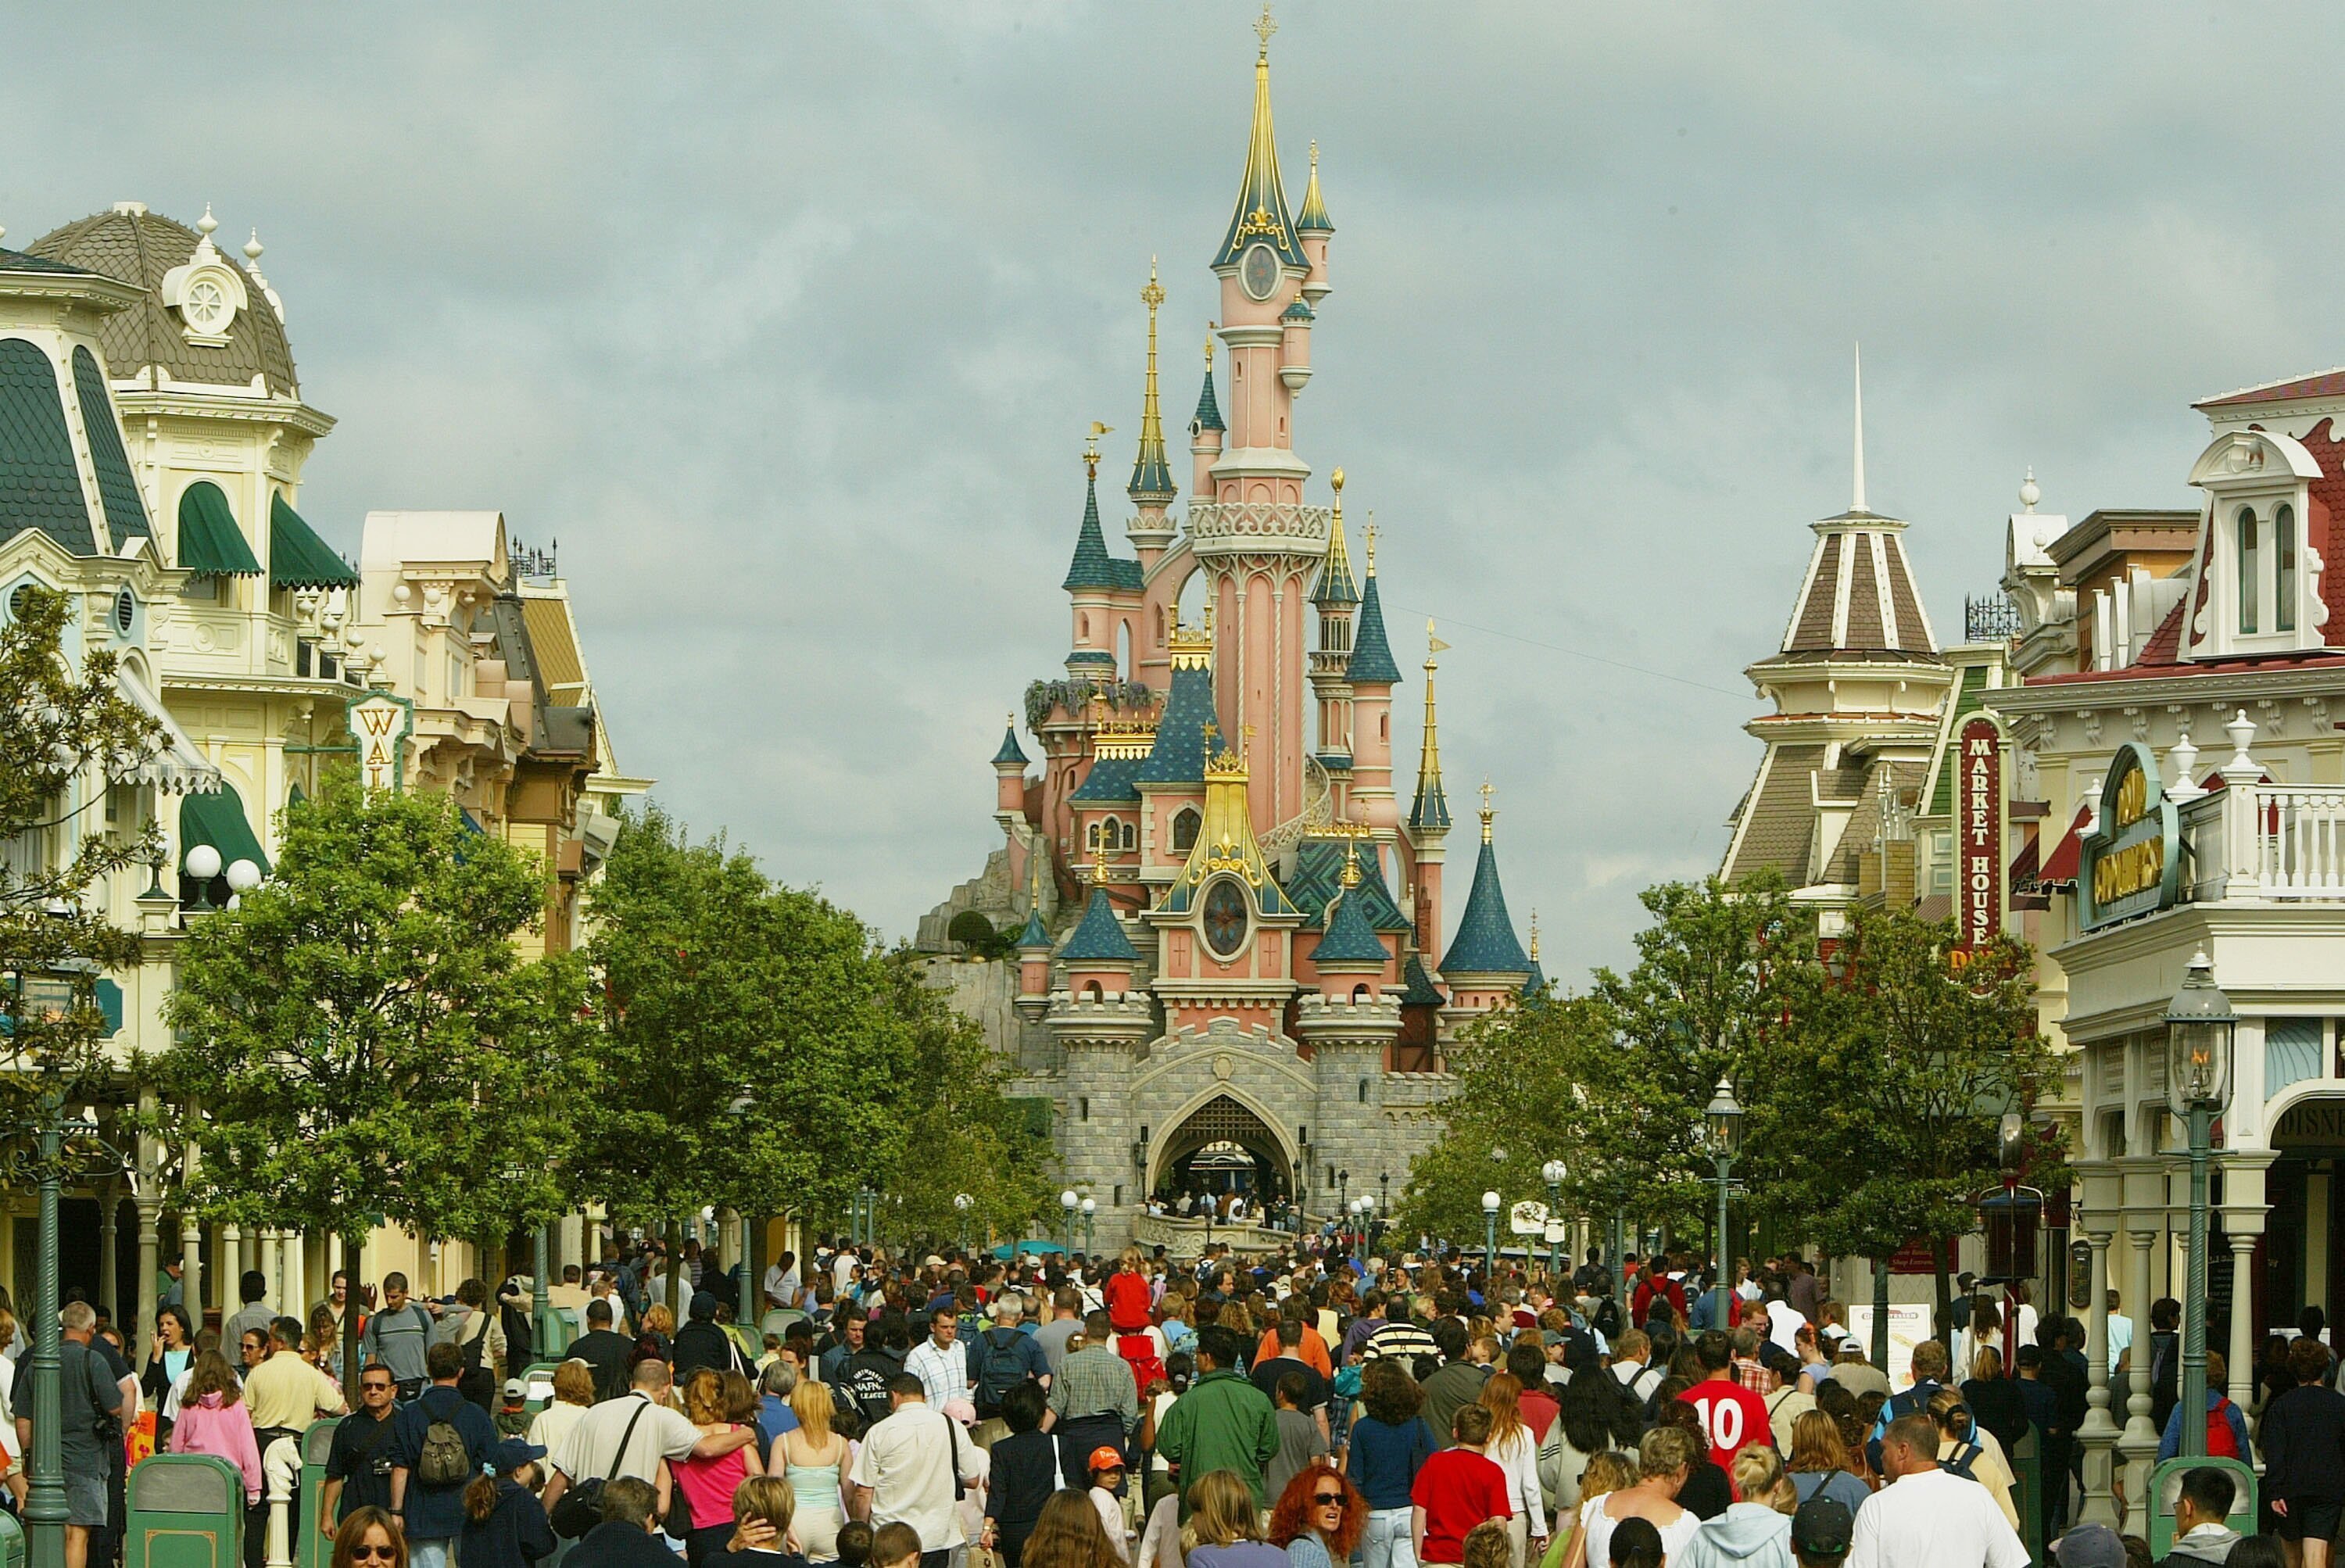 Disneyland Paris with Cinderella's castle in the background | Photo: Getty Images